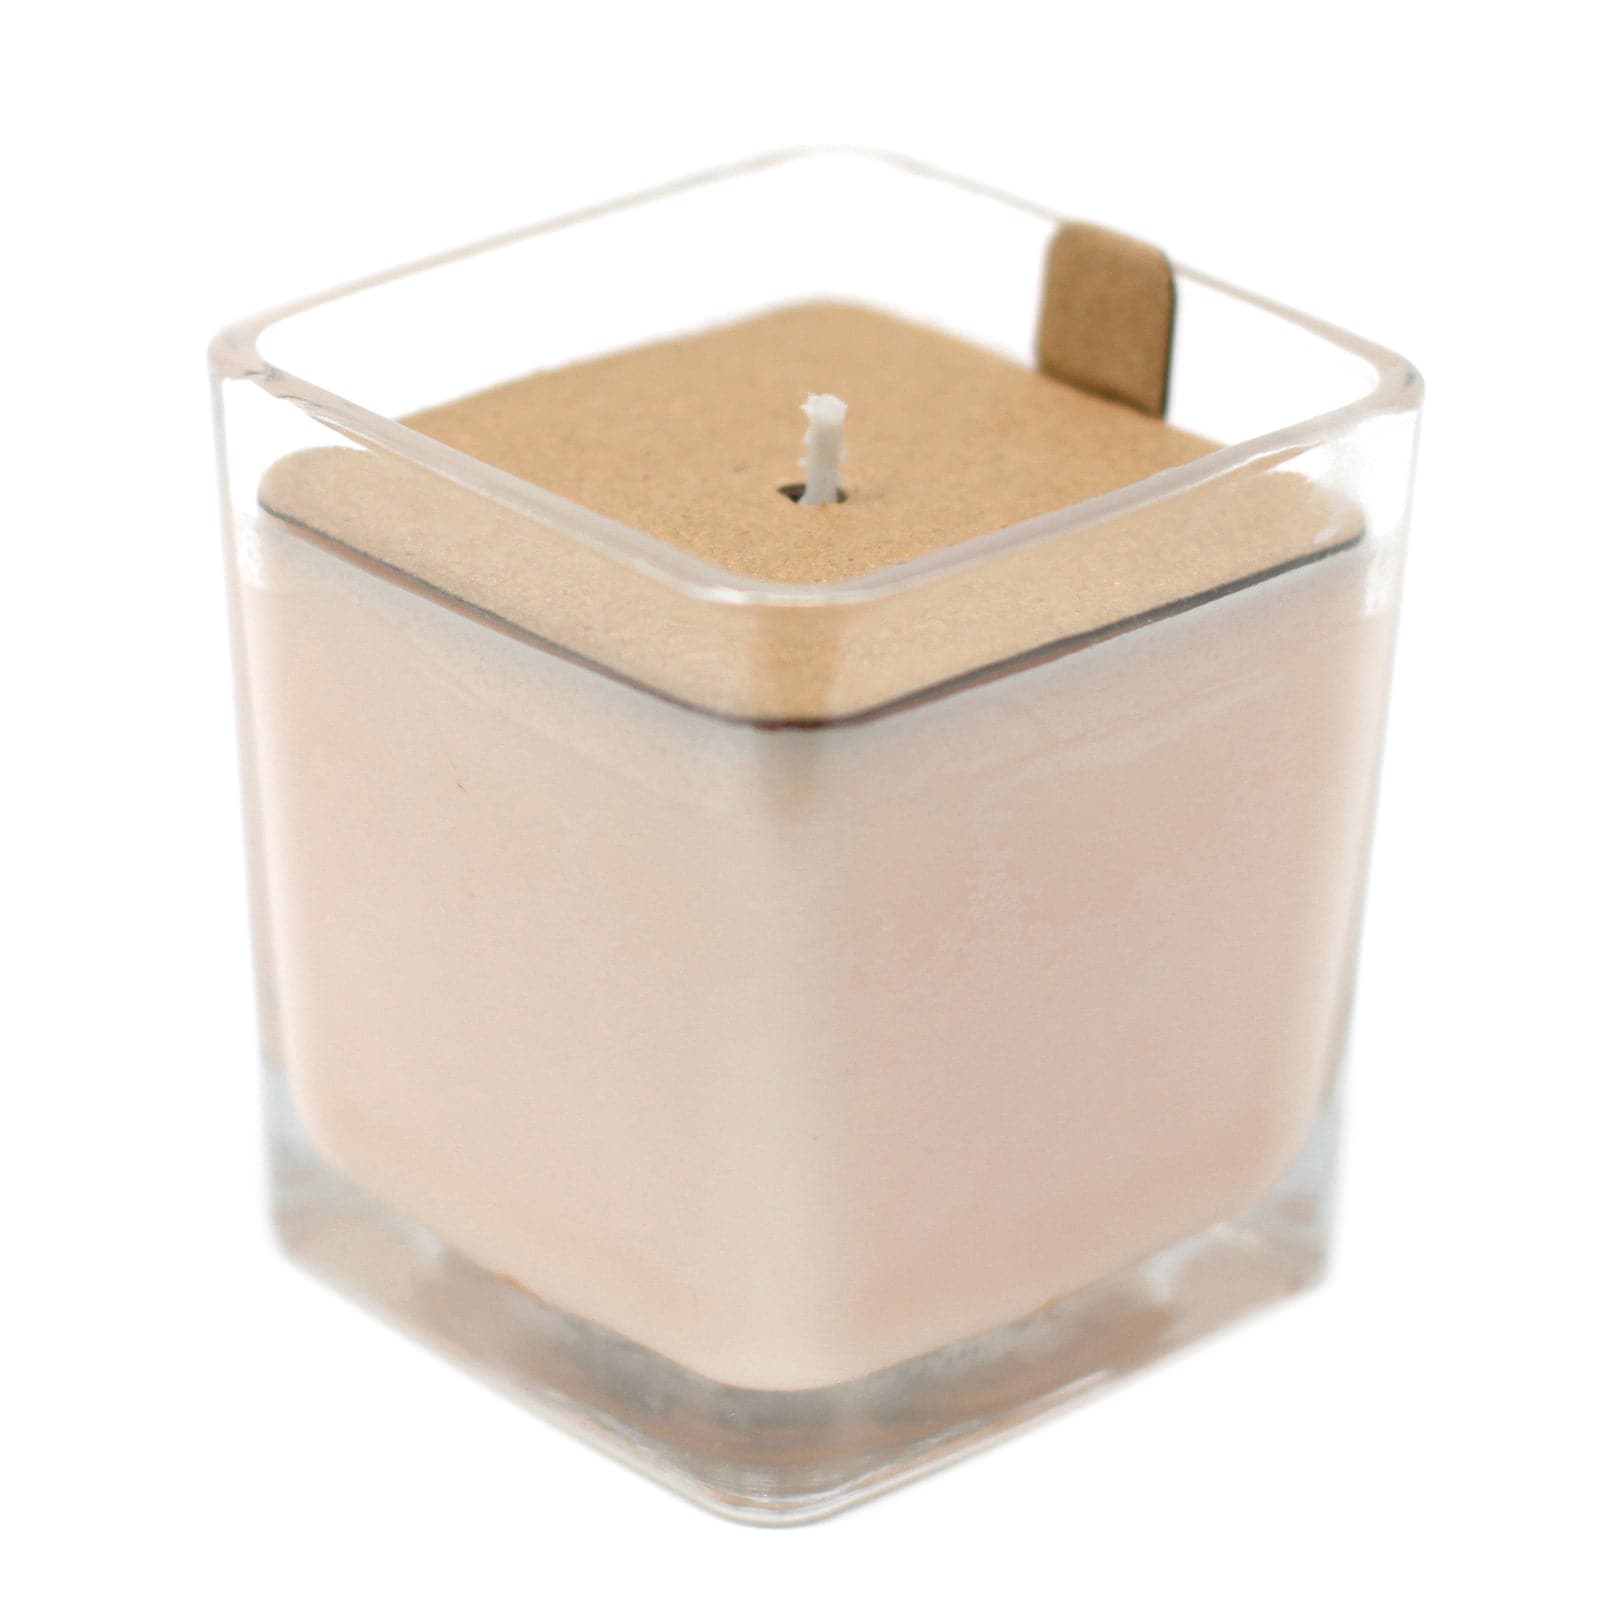 White Label Soy Wax Jar Candle - Home Bakery - best price from Maltashopper.com WLSOYC-10